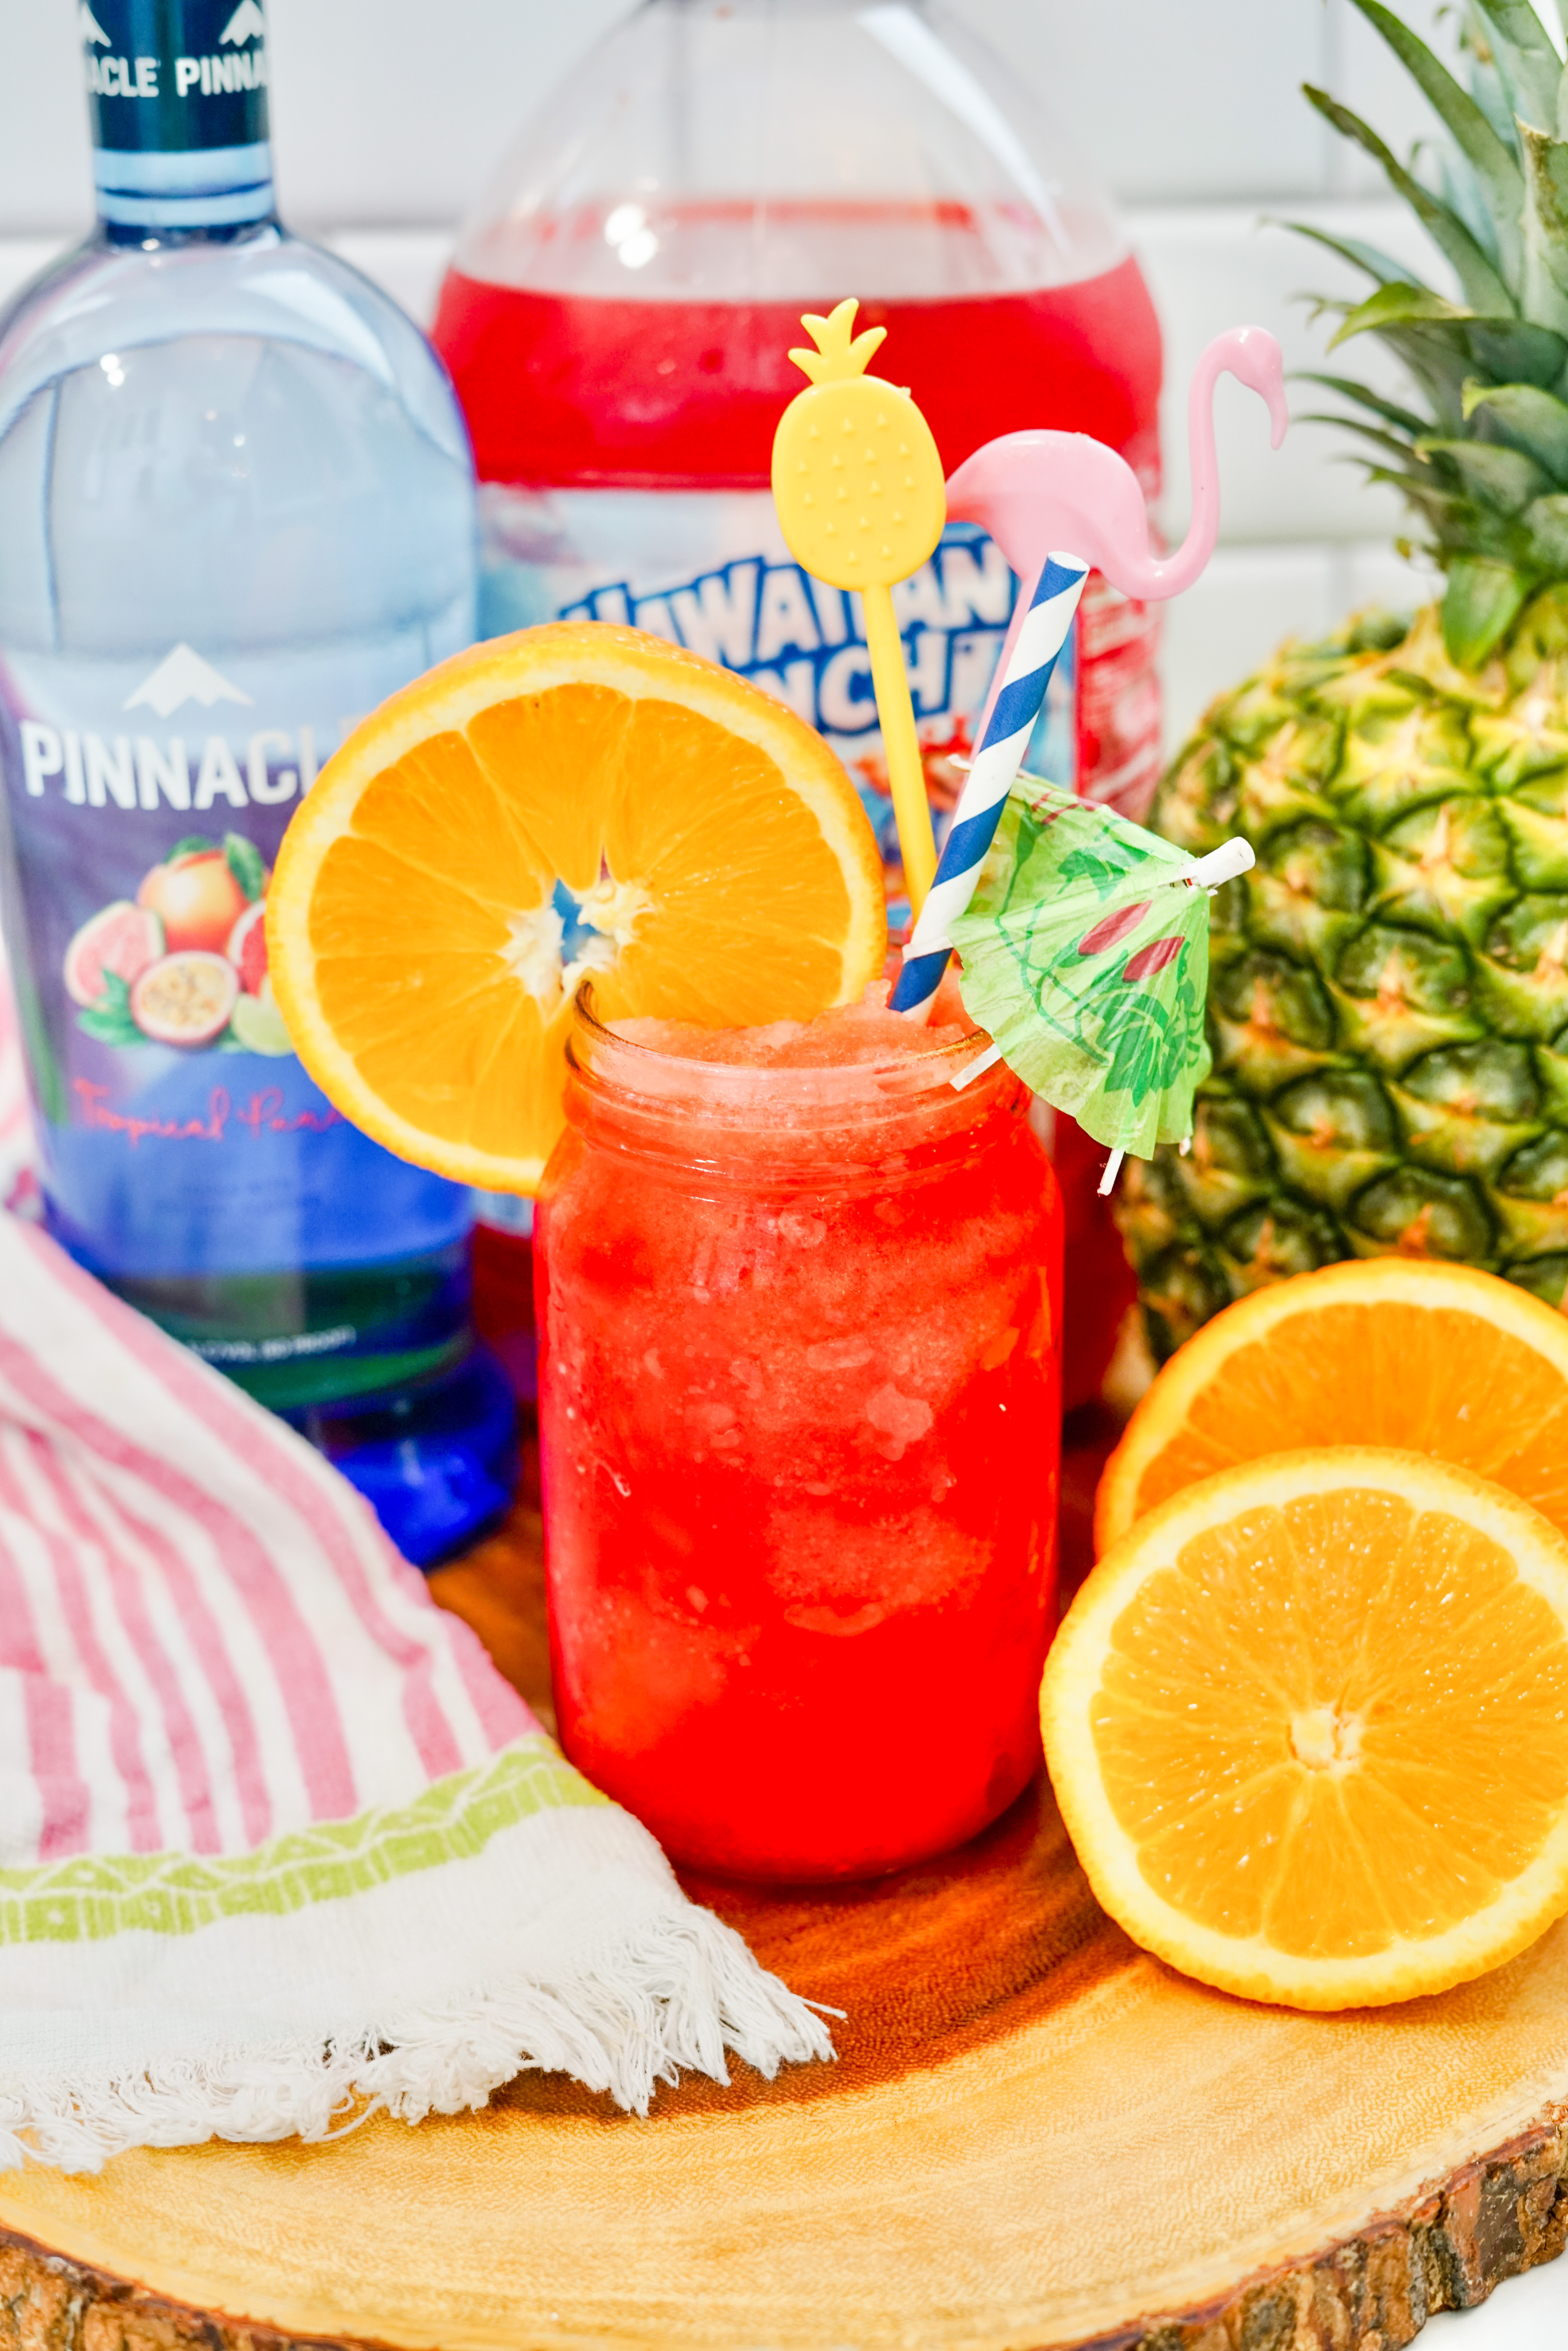 Tropical Punch Pinnacle Vodka Recipes: Perfect Summer Cocktails